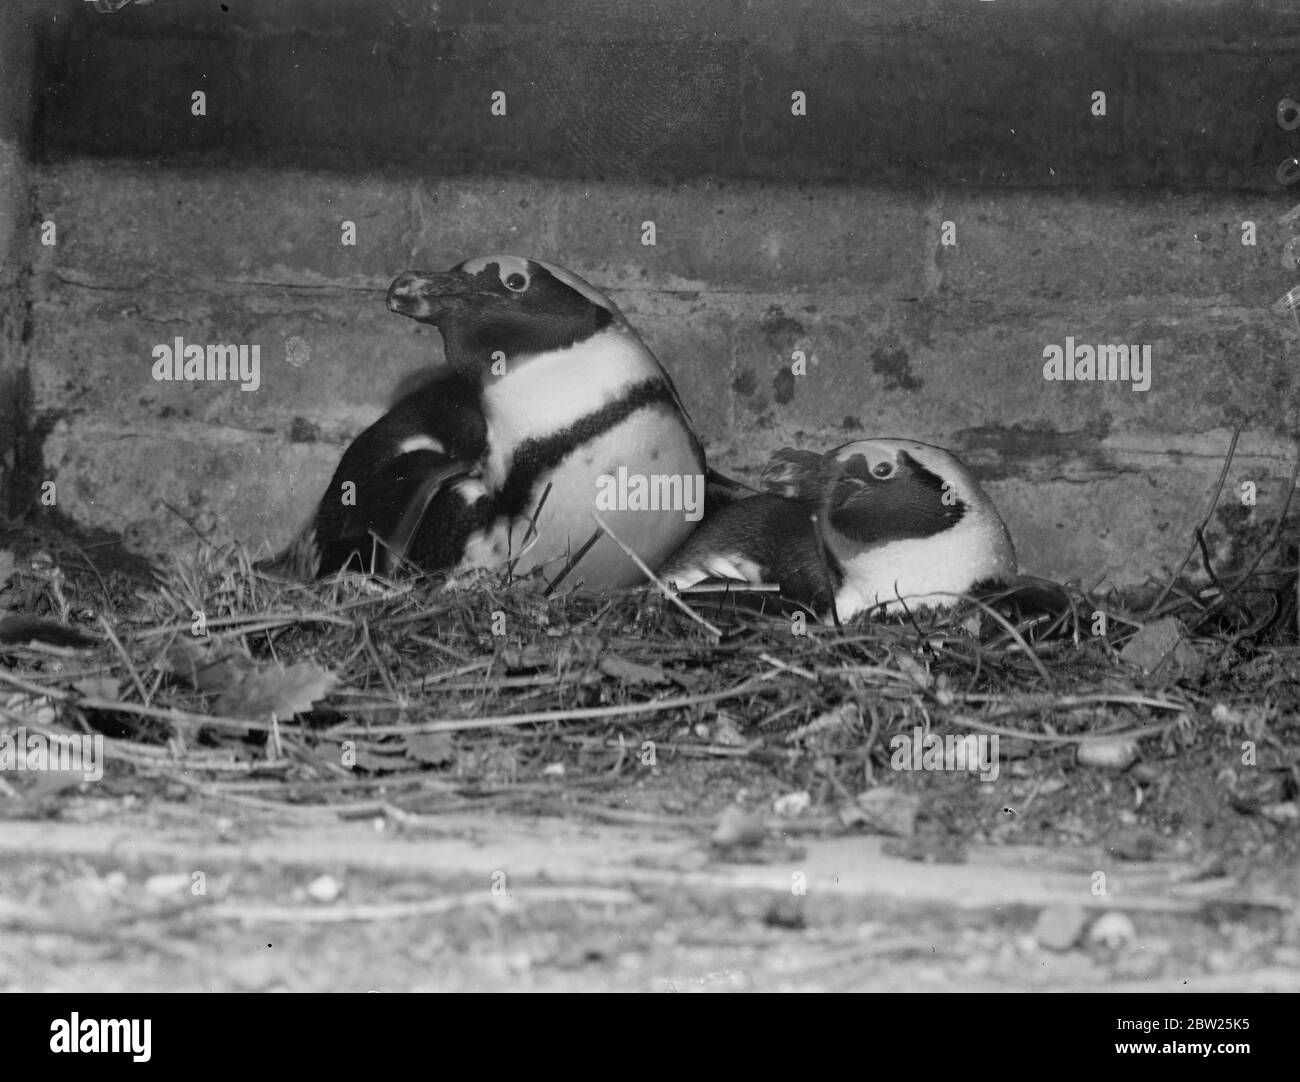 Zoo eggs Black and White Stock Photos & Images - Alamy